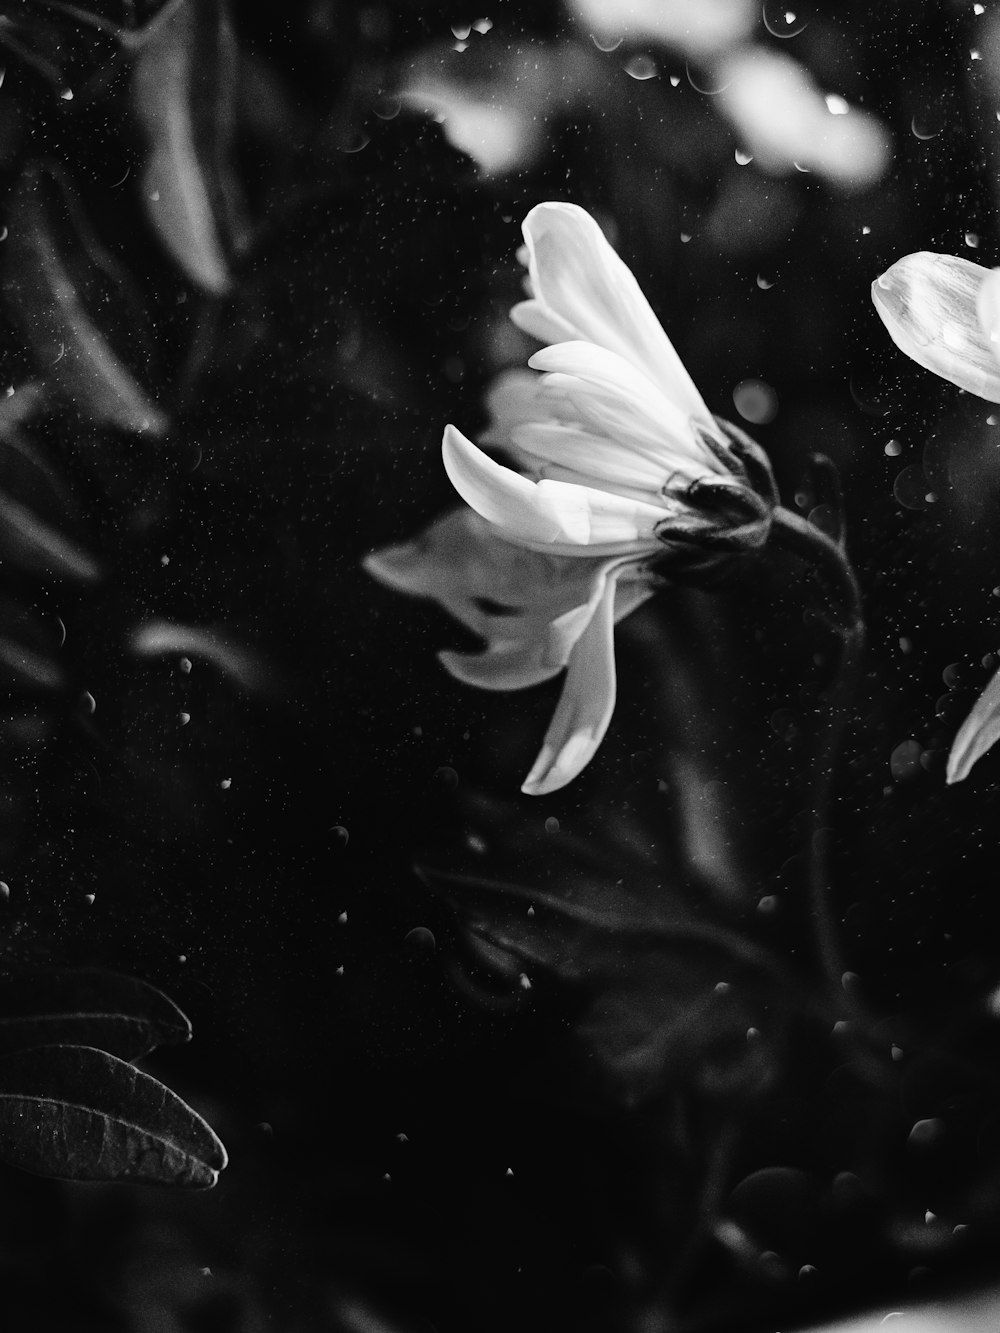 a black and white photo of some flowers